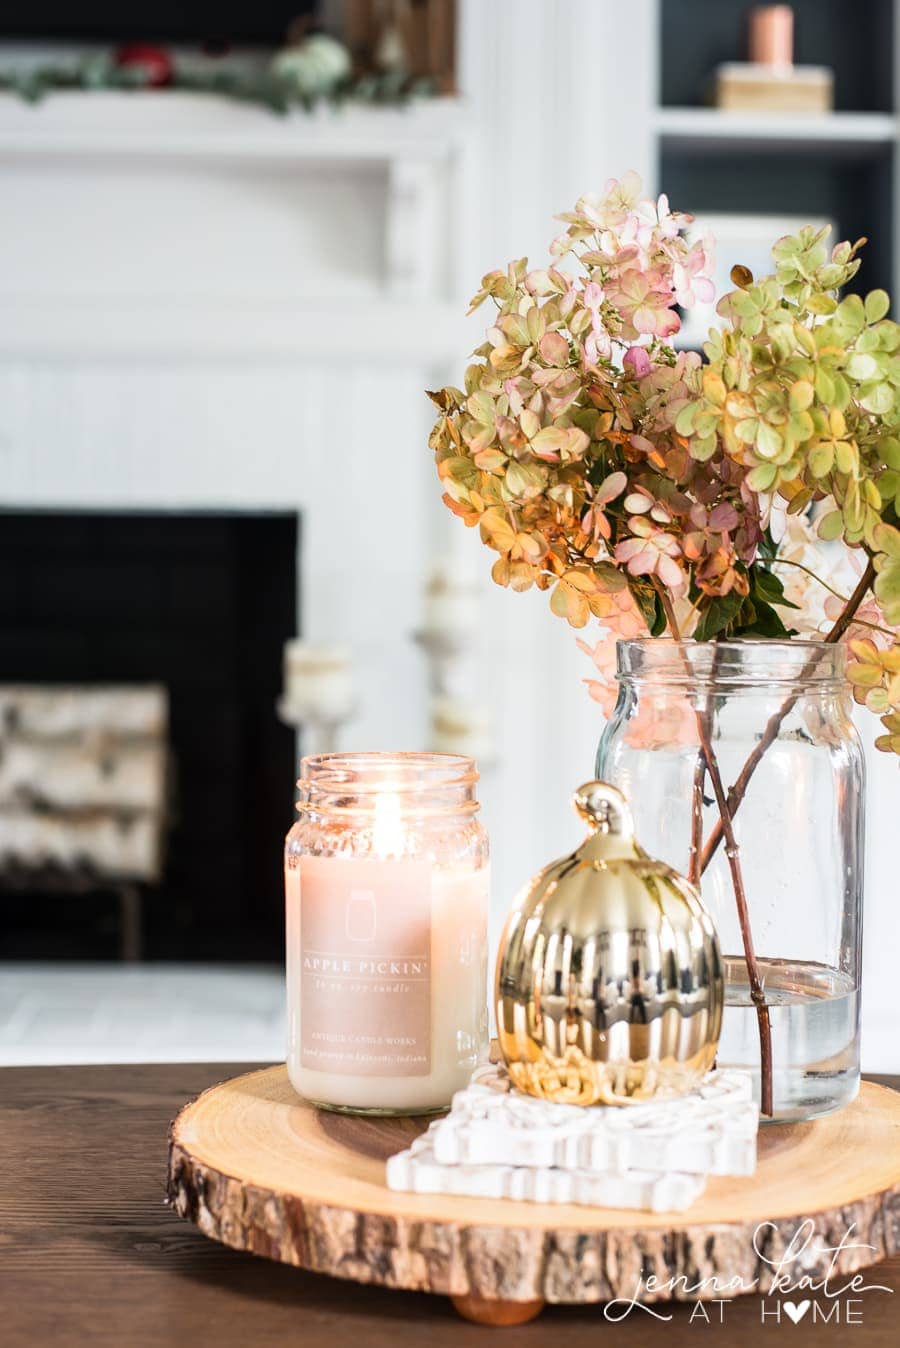 Scented Candles and Dried Flowers on the Coffee Table are perfect for fall